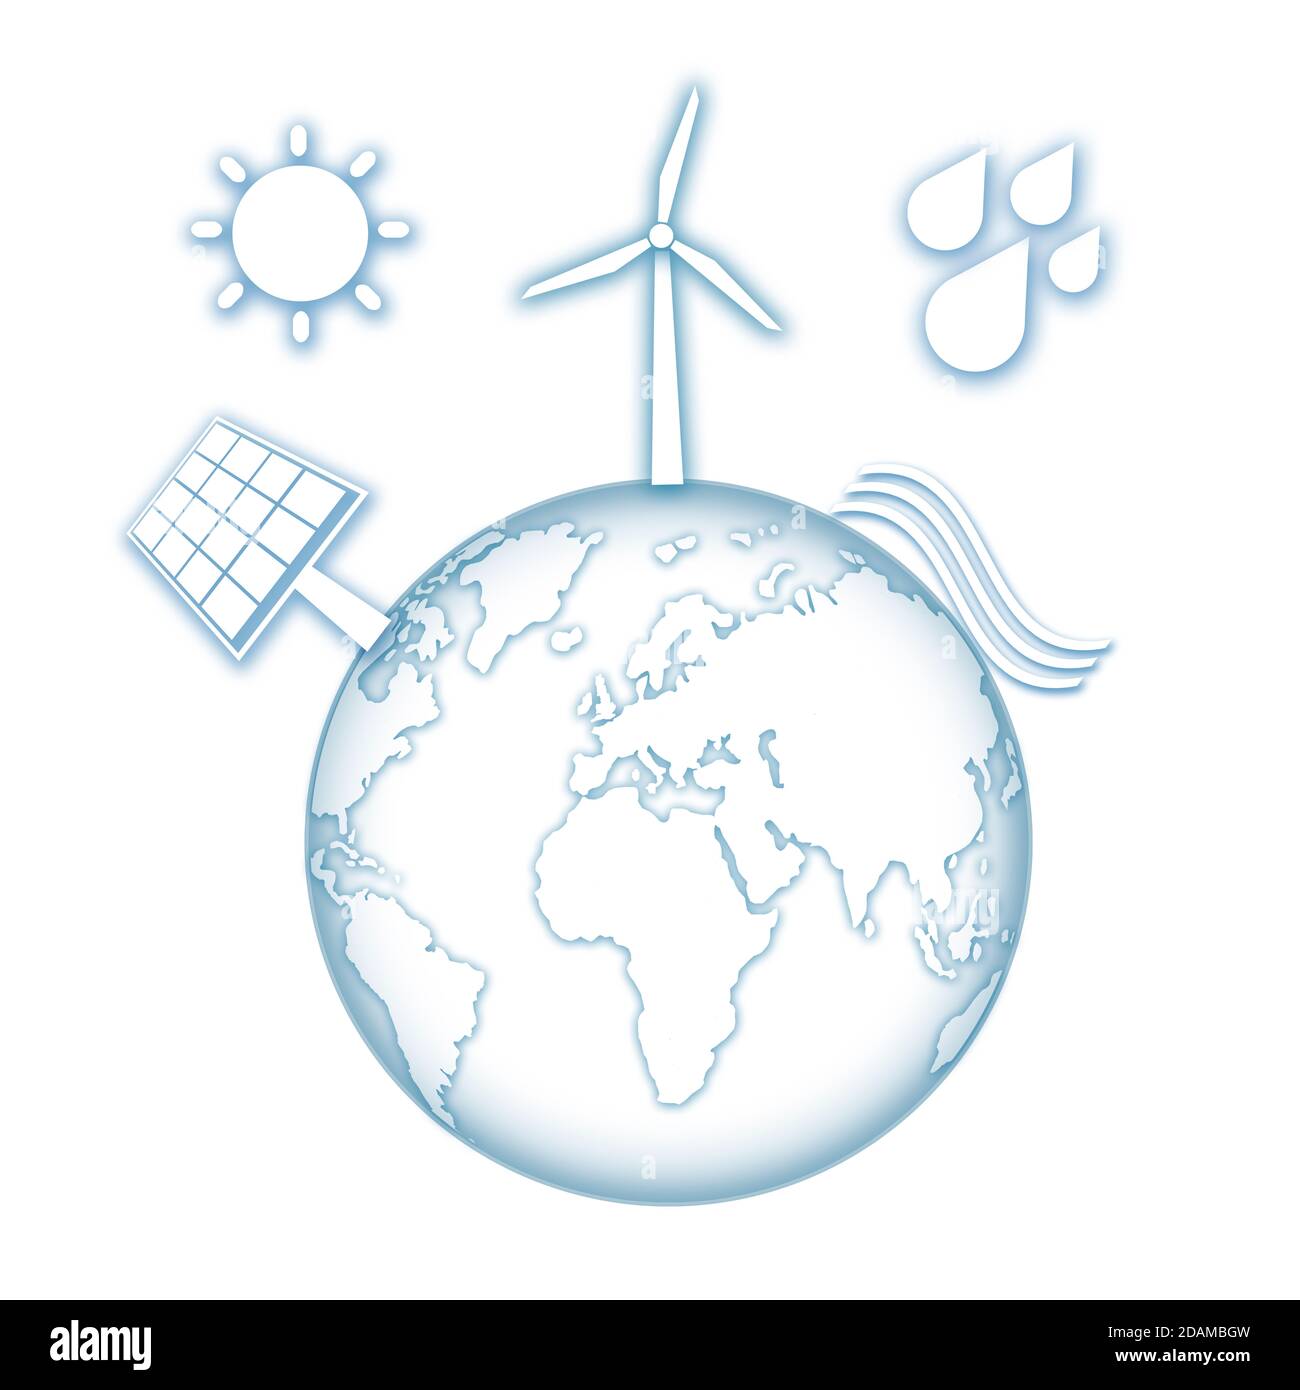 Earth with renewable sources of power, illustration. Stock Photo